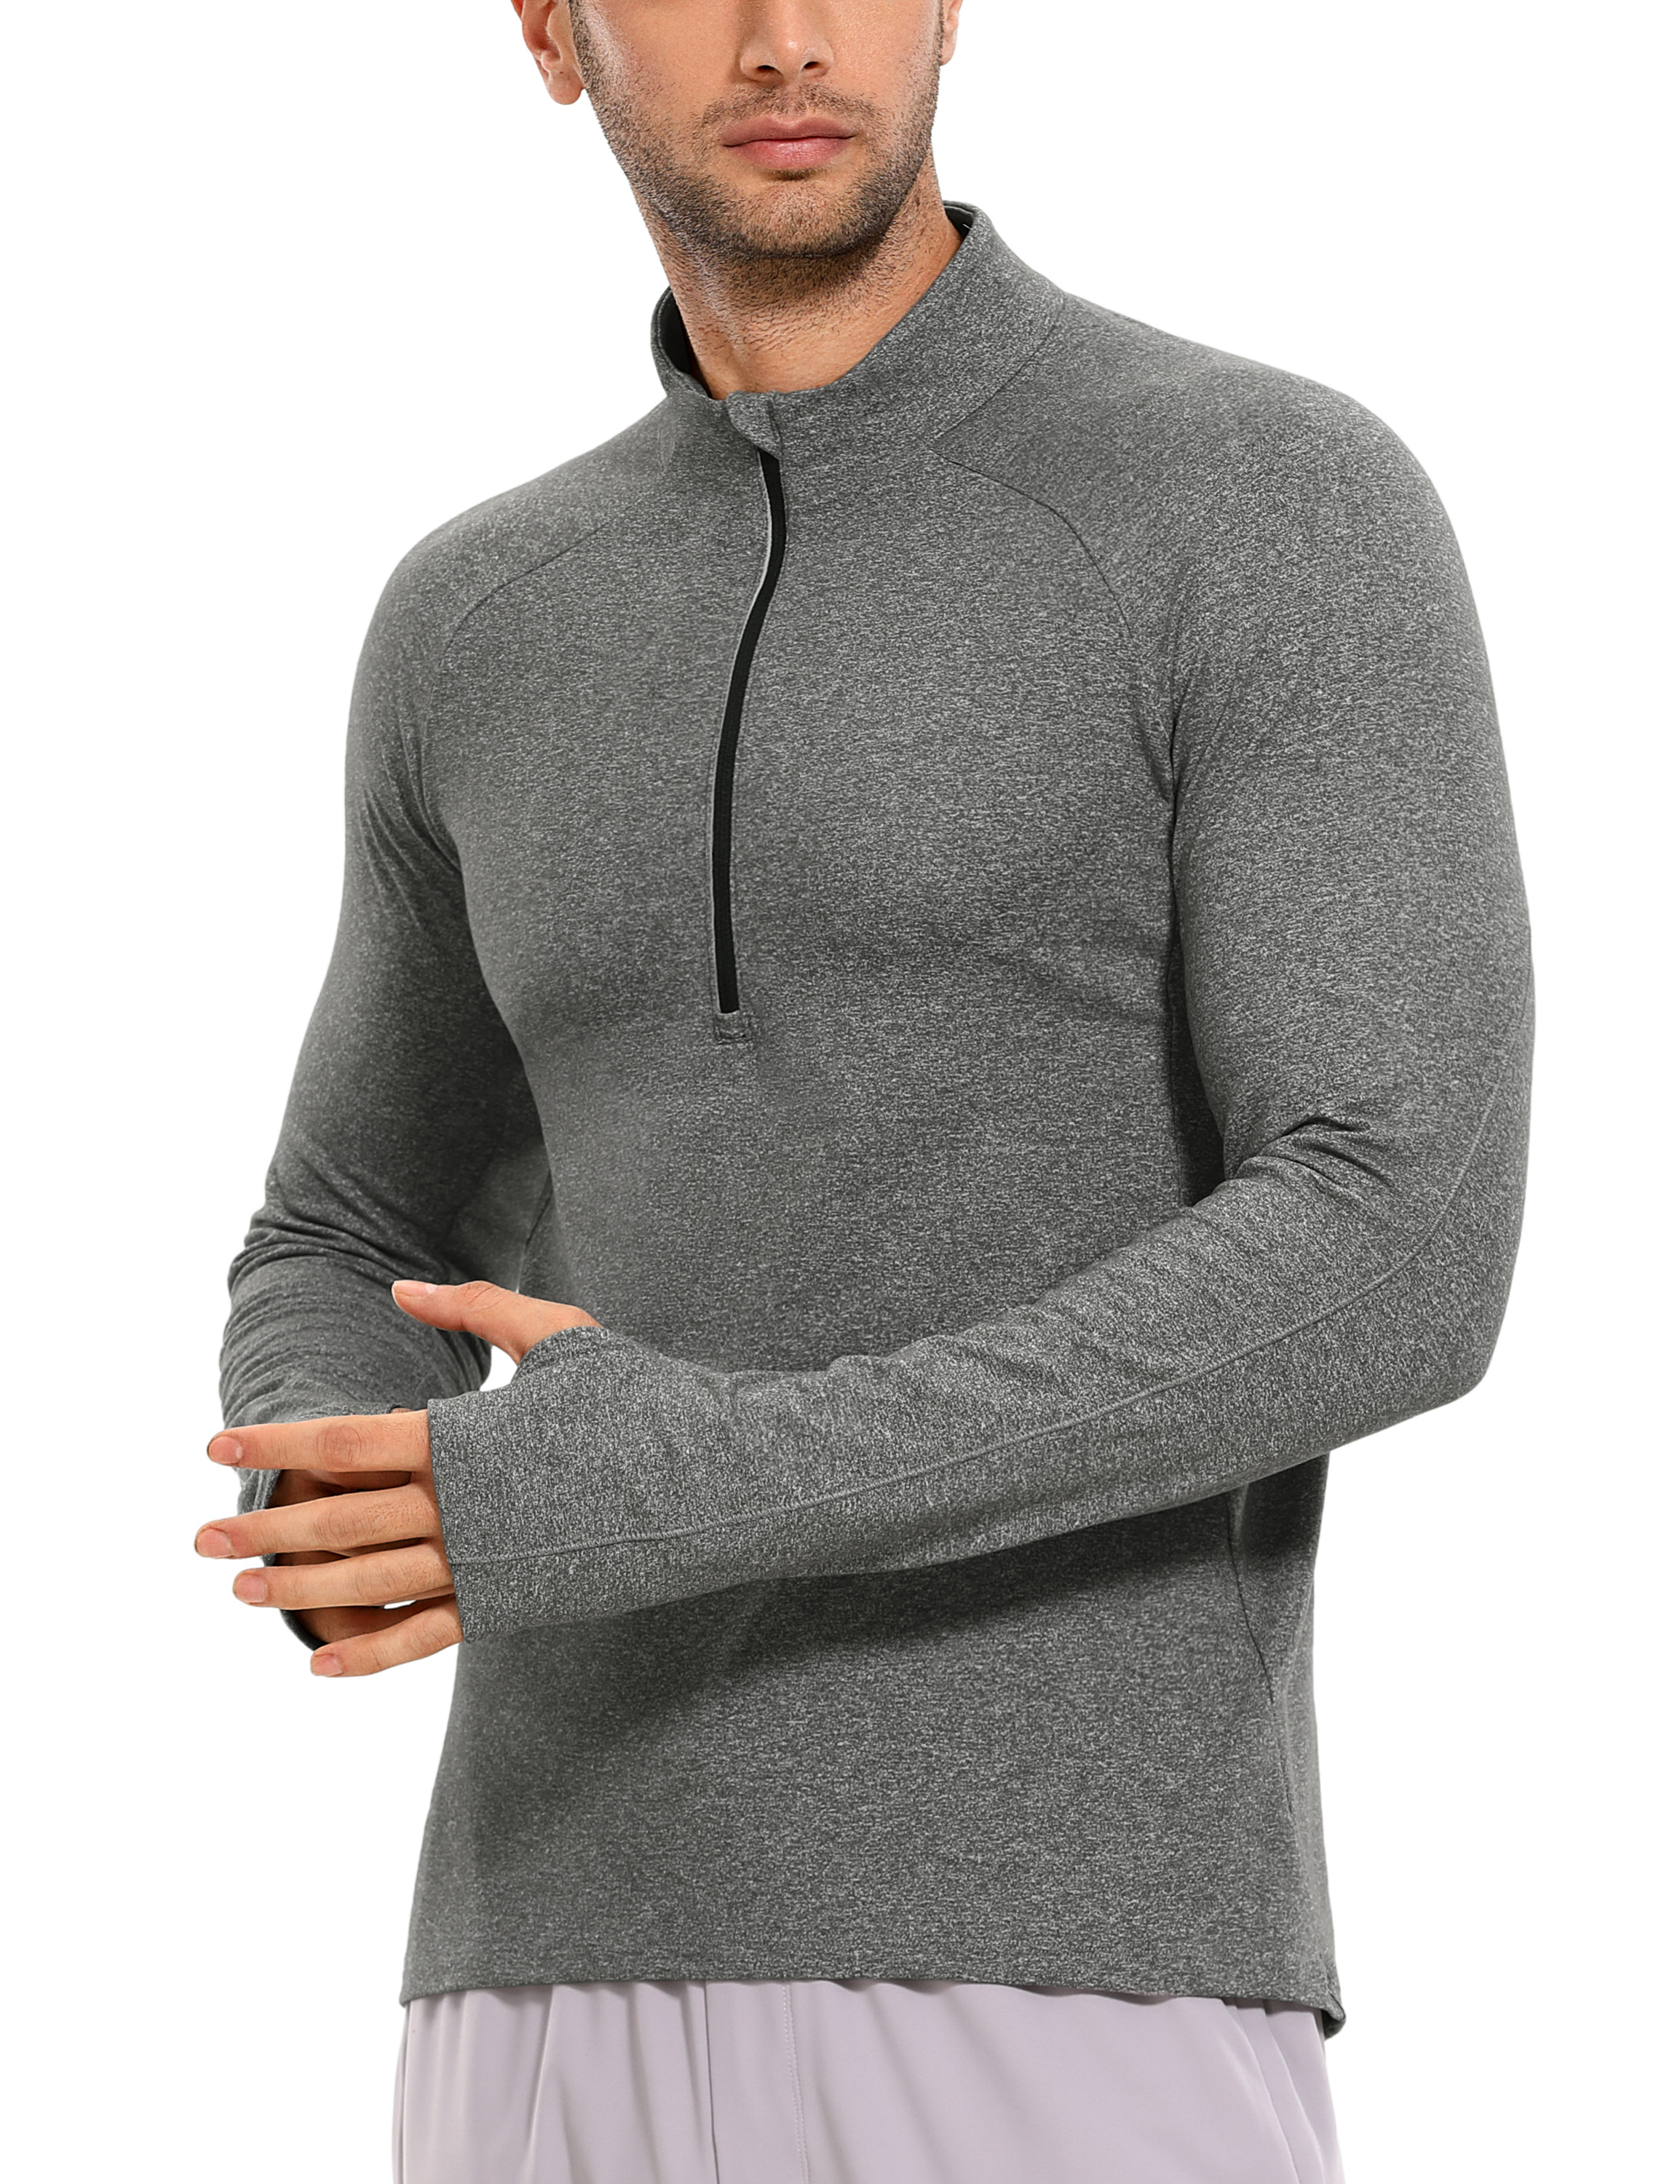 CRZ YOGA Men's Half Zip Pullover Athletic Tee Shirts Workout